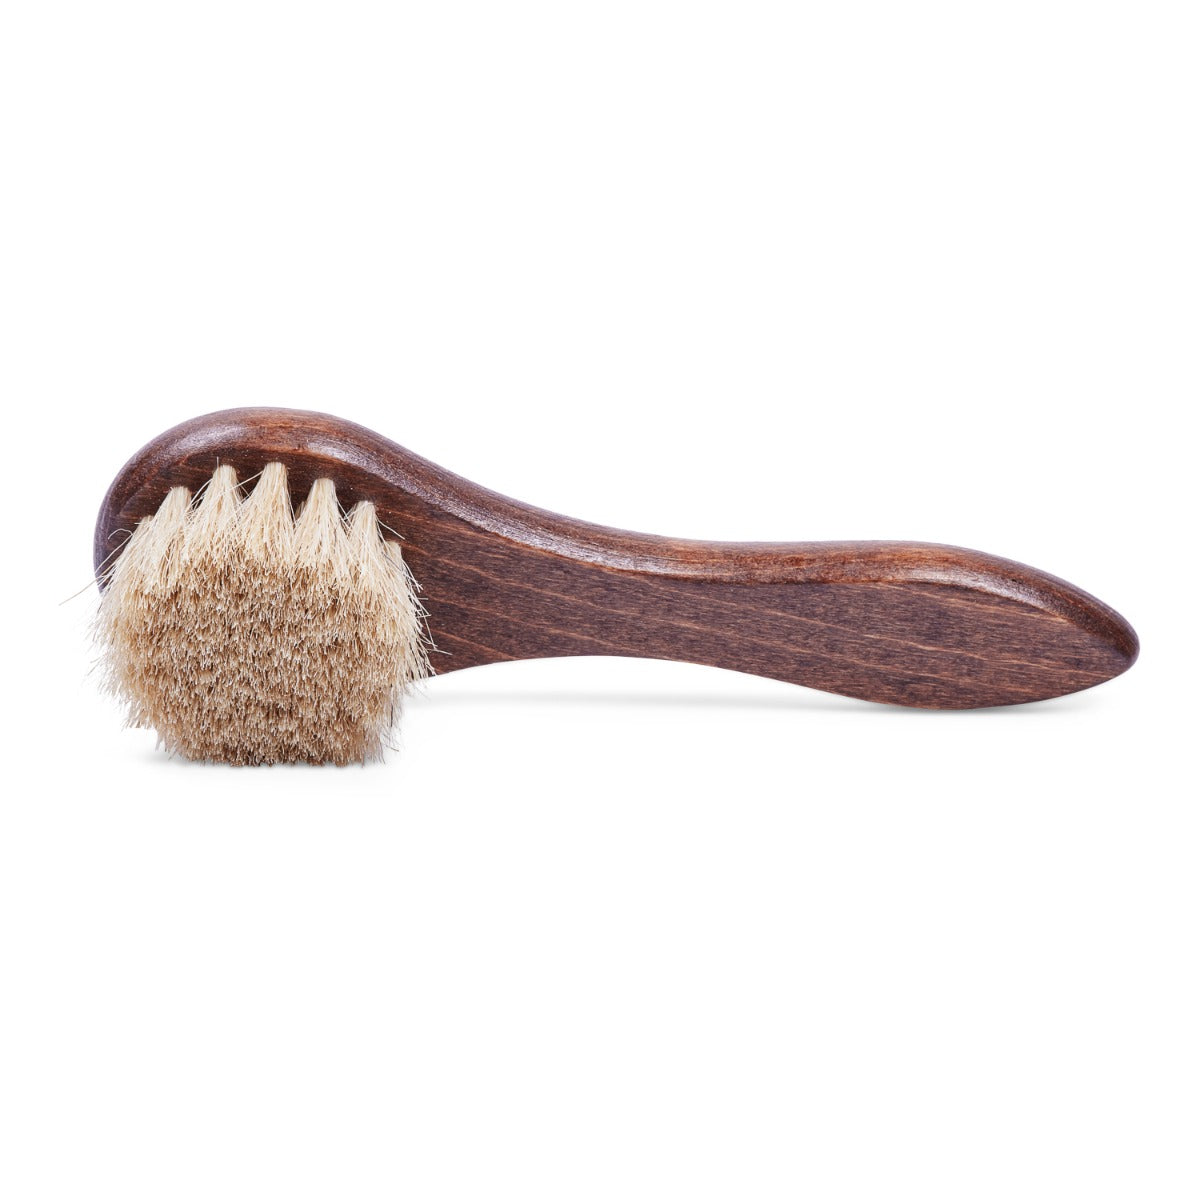 A wooden brush with bristles suitable for Extra-Large Shoe Cleaning Dauber by KirbyAllison.com on a white background.